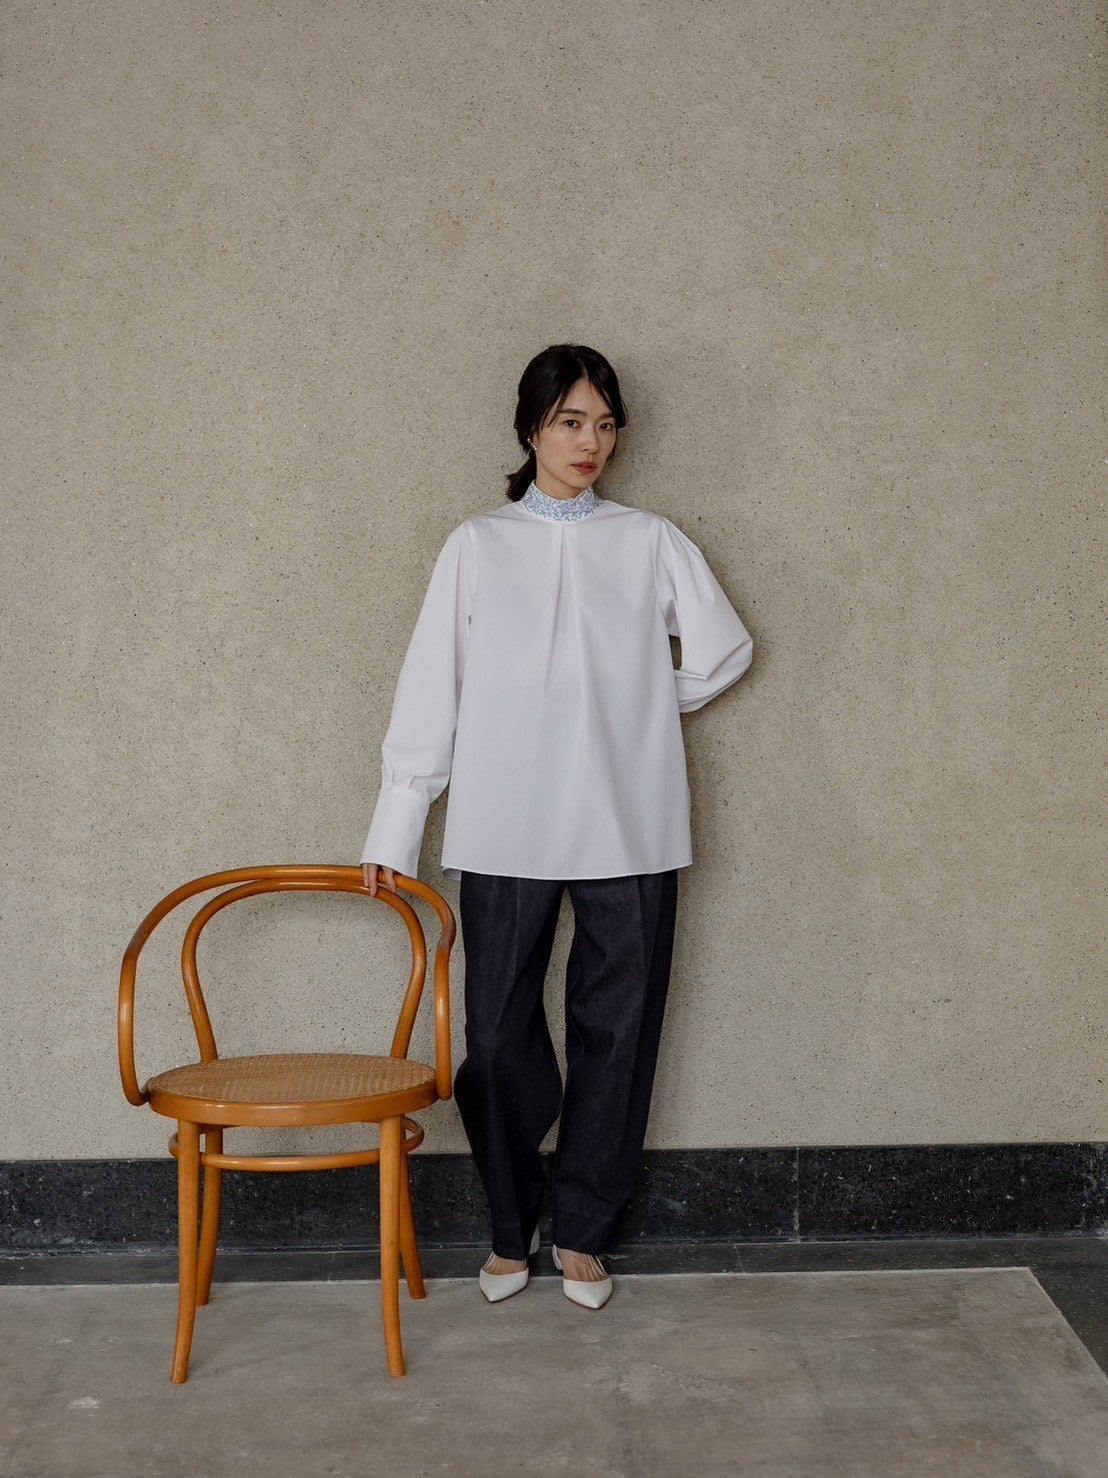 Valentina / blooming embroidery blouse (NAVY×NAVY / WHITE×SMORKY BLUE)